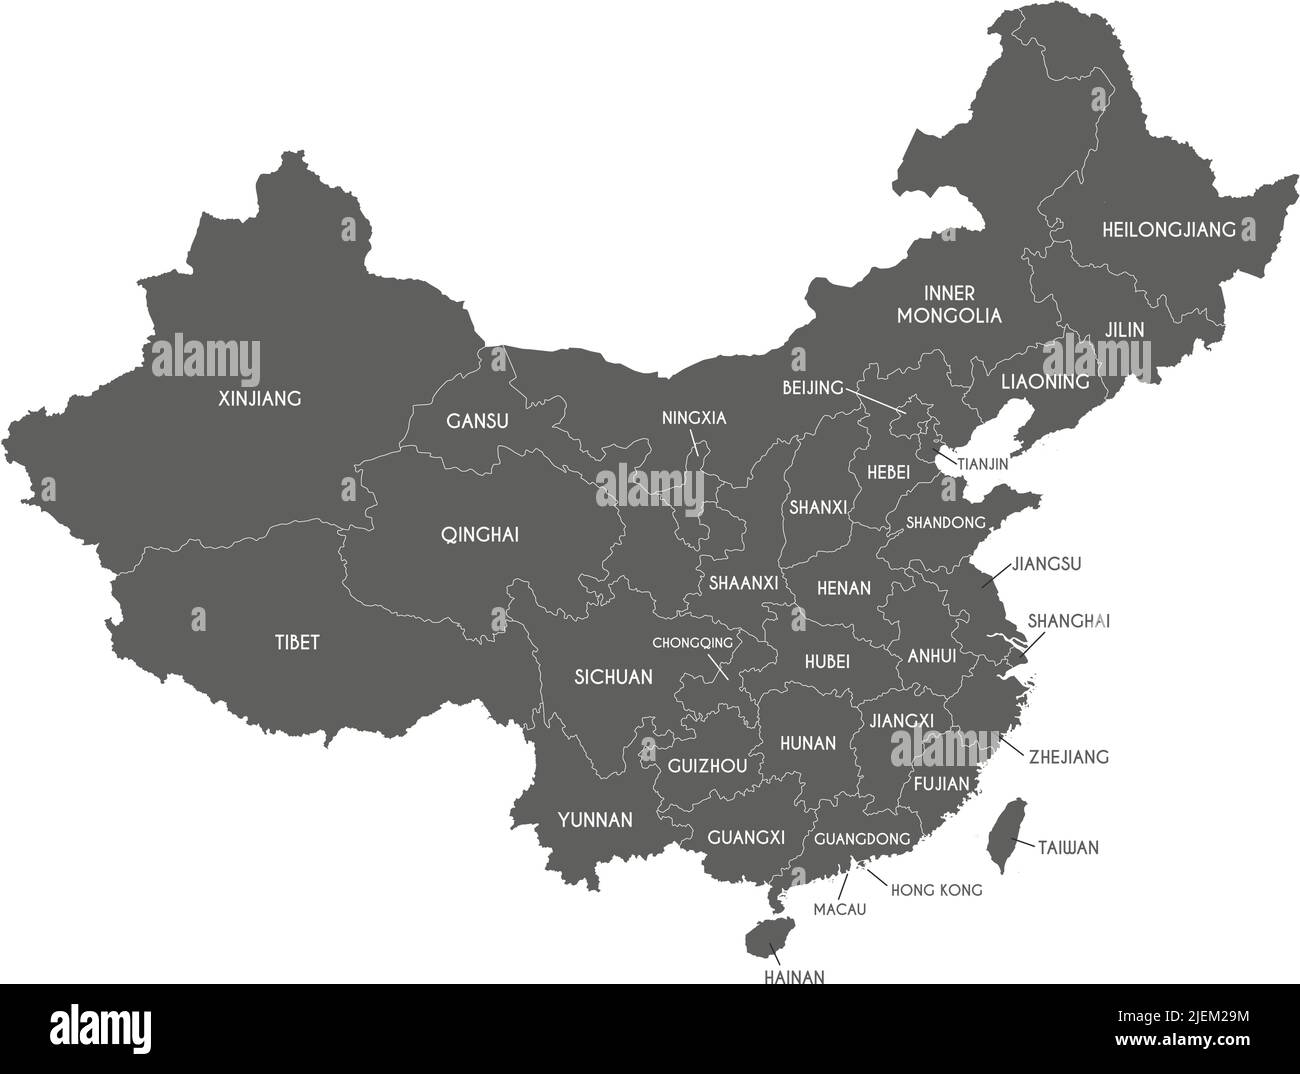 Vector map of China with provinces, regions and administrative divisions. Editable and clearly labeled layers. Stock Vector